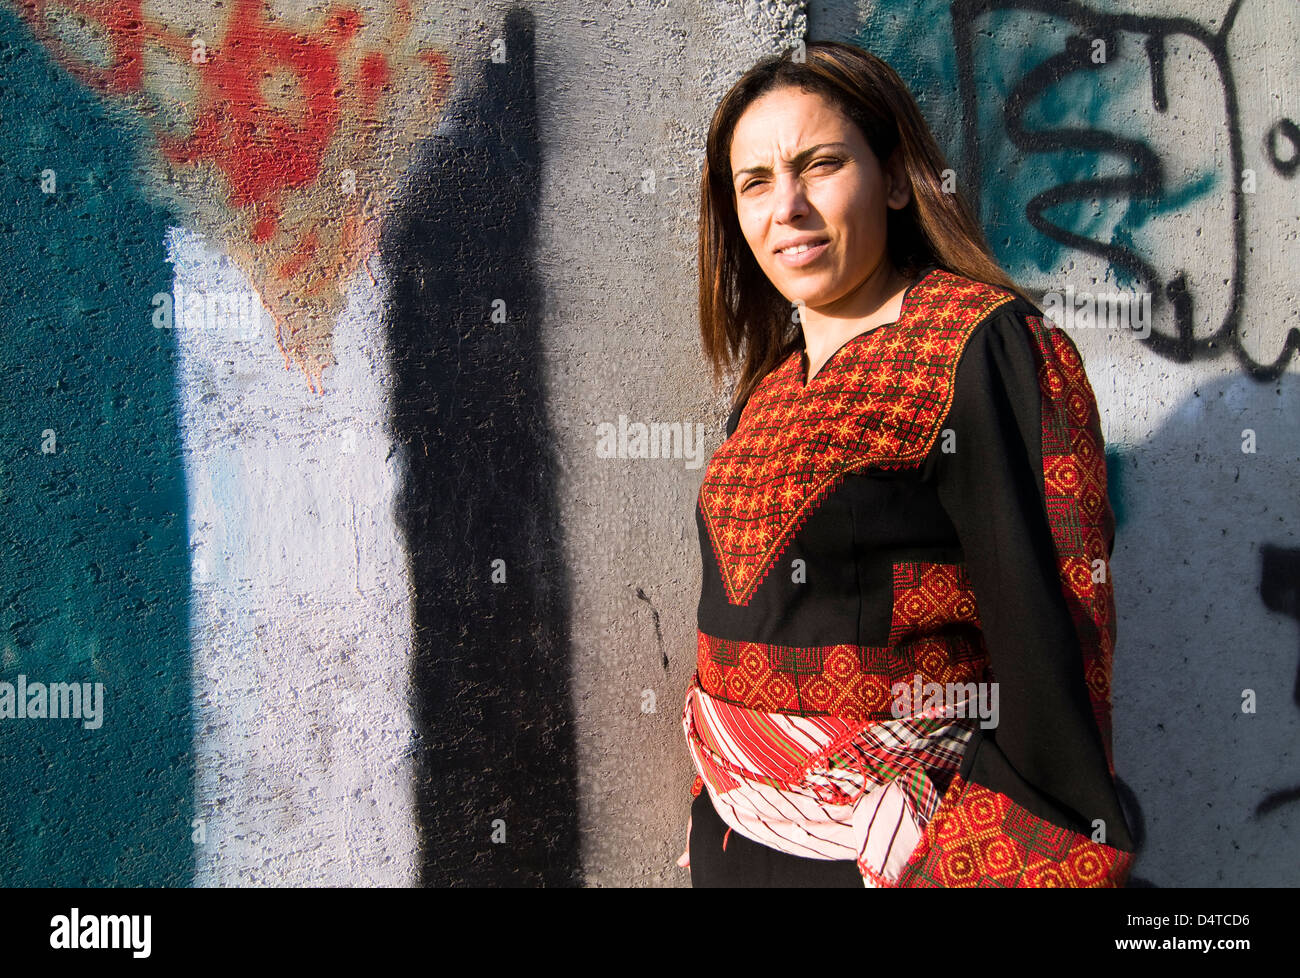 A proud Palestinian woman standing by the barrier built by the Israeli government. Art and graffiti decorate this concrete wall. Stock Photo